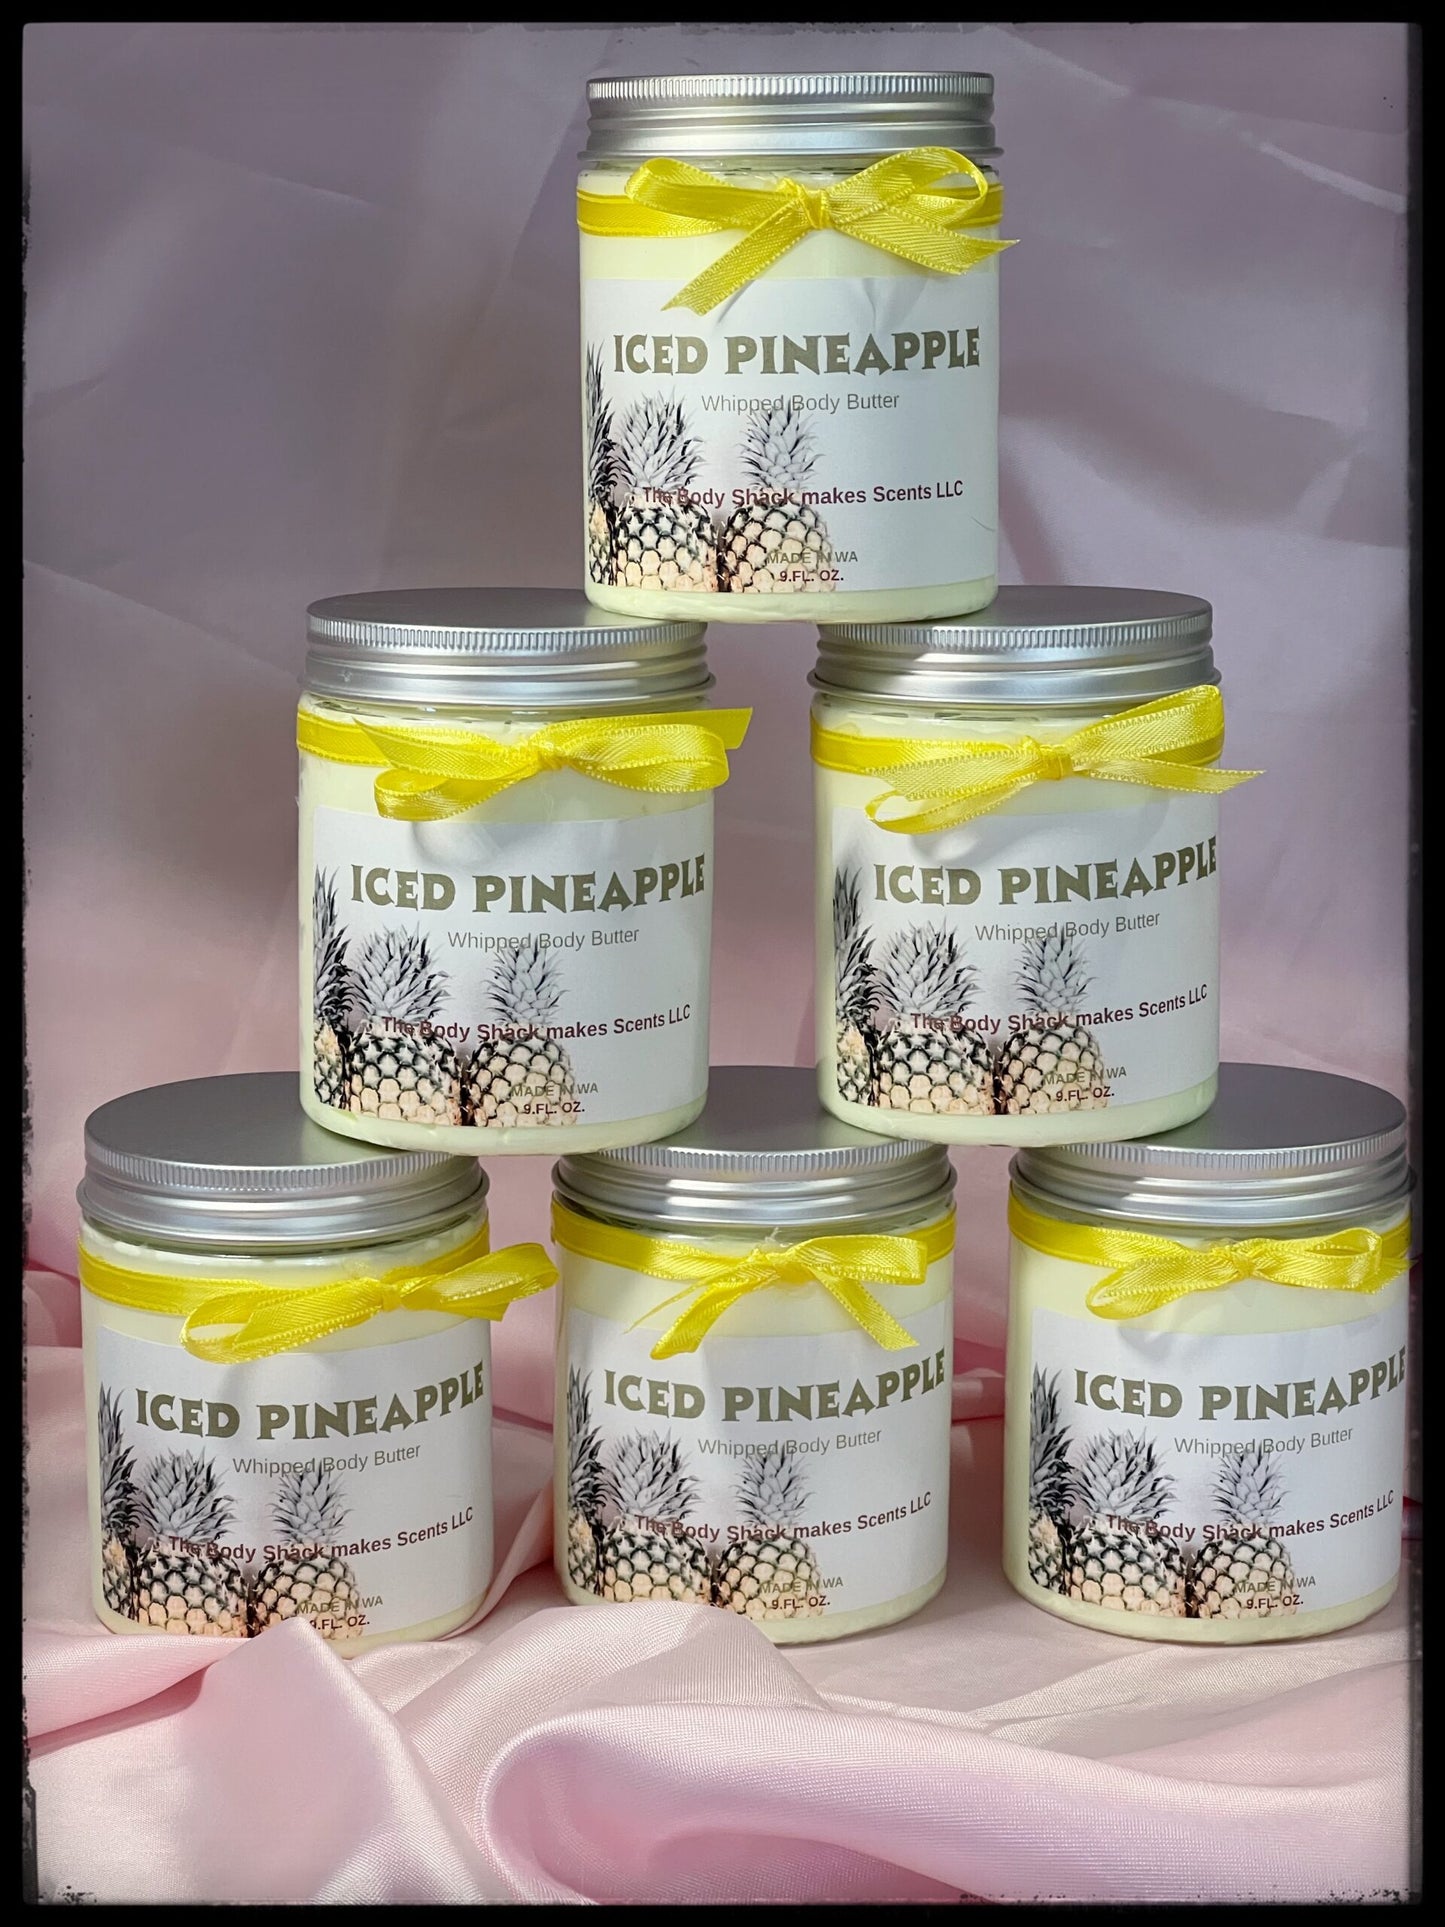 Iced Pineapple Whipped Body Butter